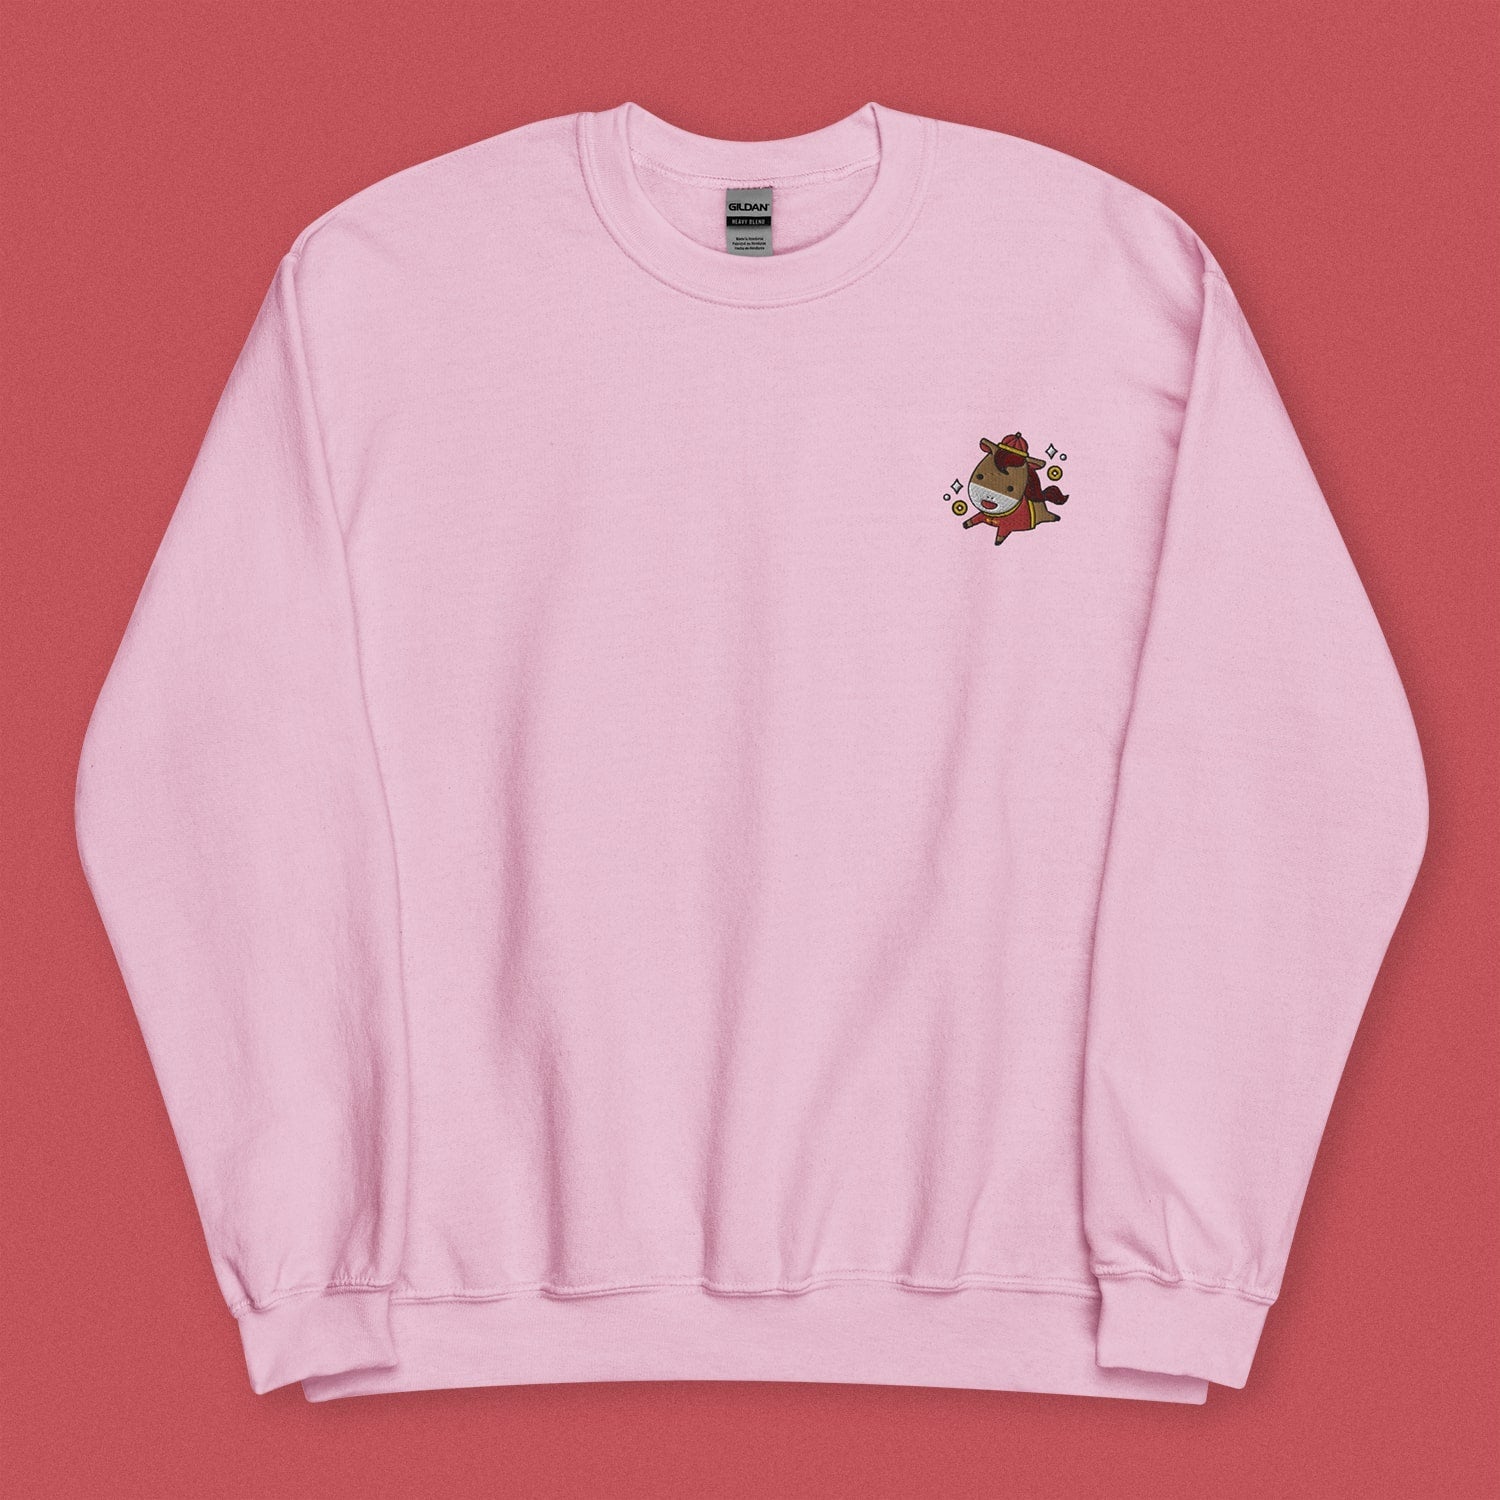 Year of the Horse Embroidered Sweatshirt - Ni De Mama Chinese Clothing